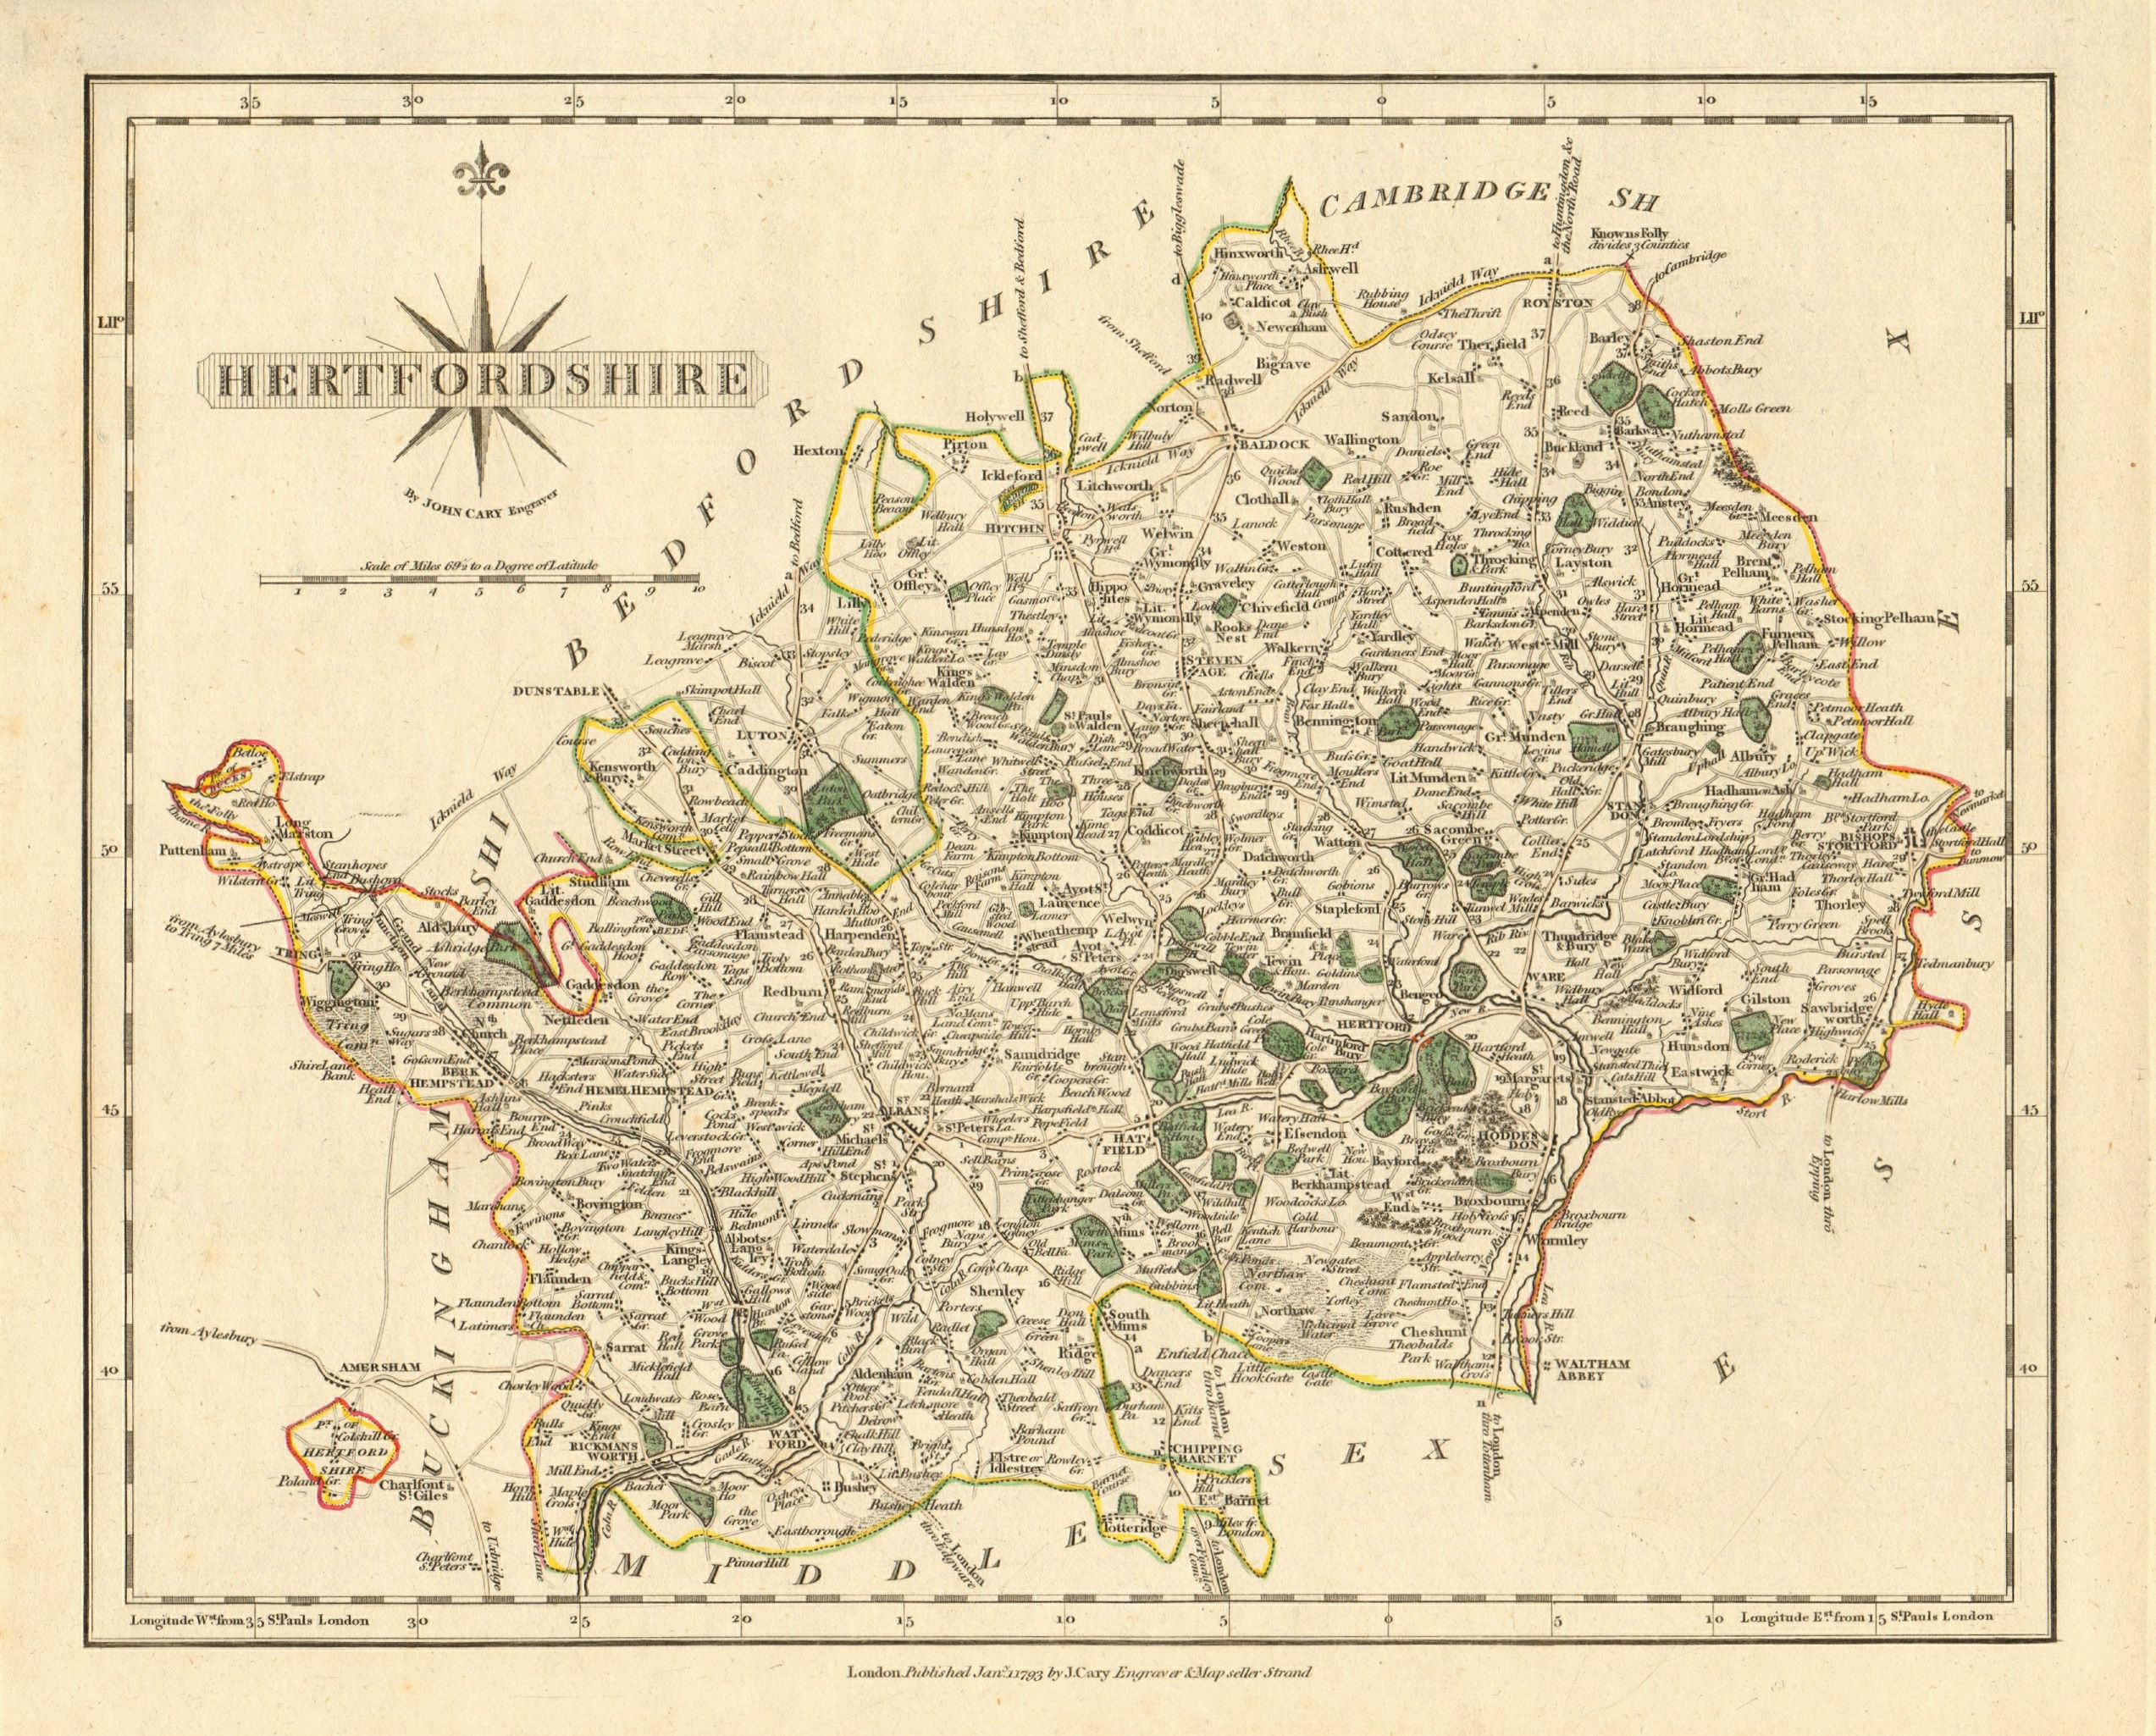 Associate Product Antique county map of HERTFORDSHIRE by JOHN CARY. Original outline colour 1793